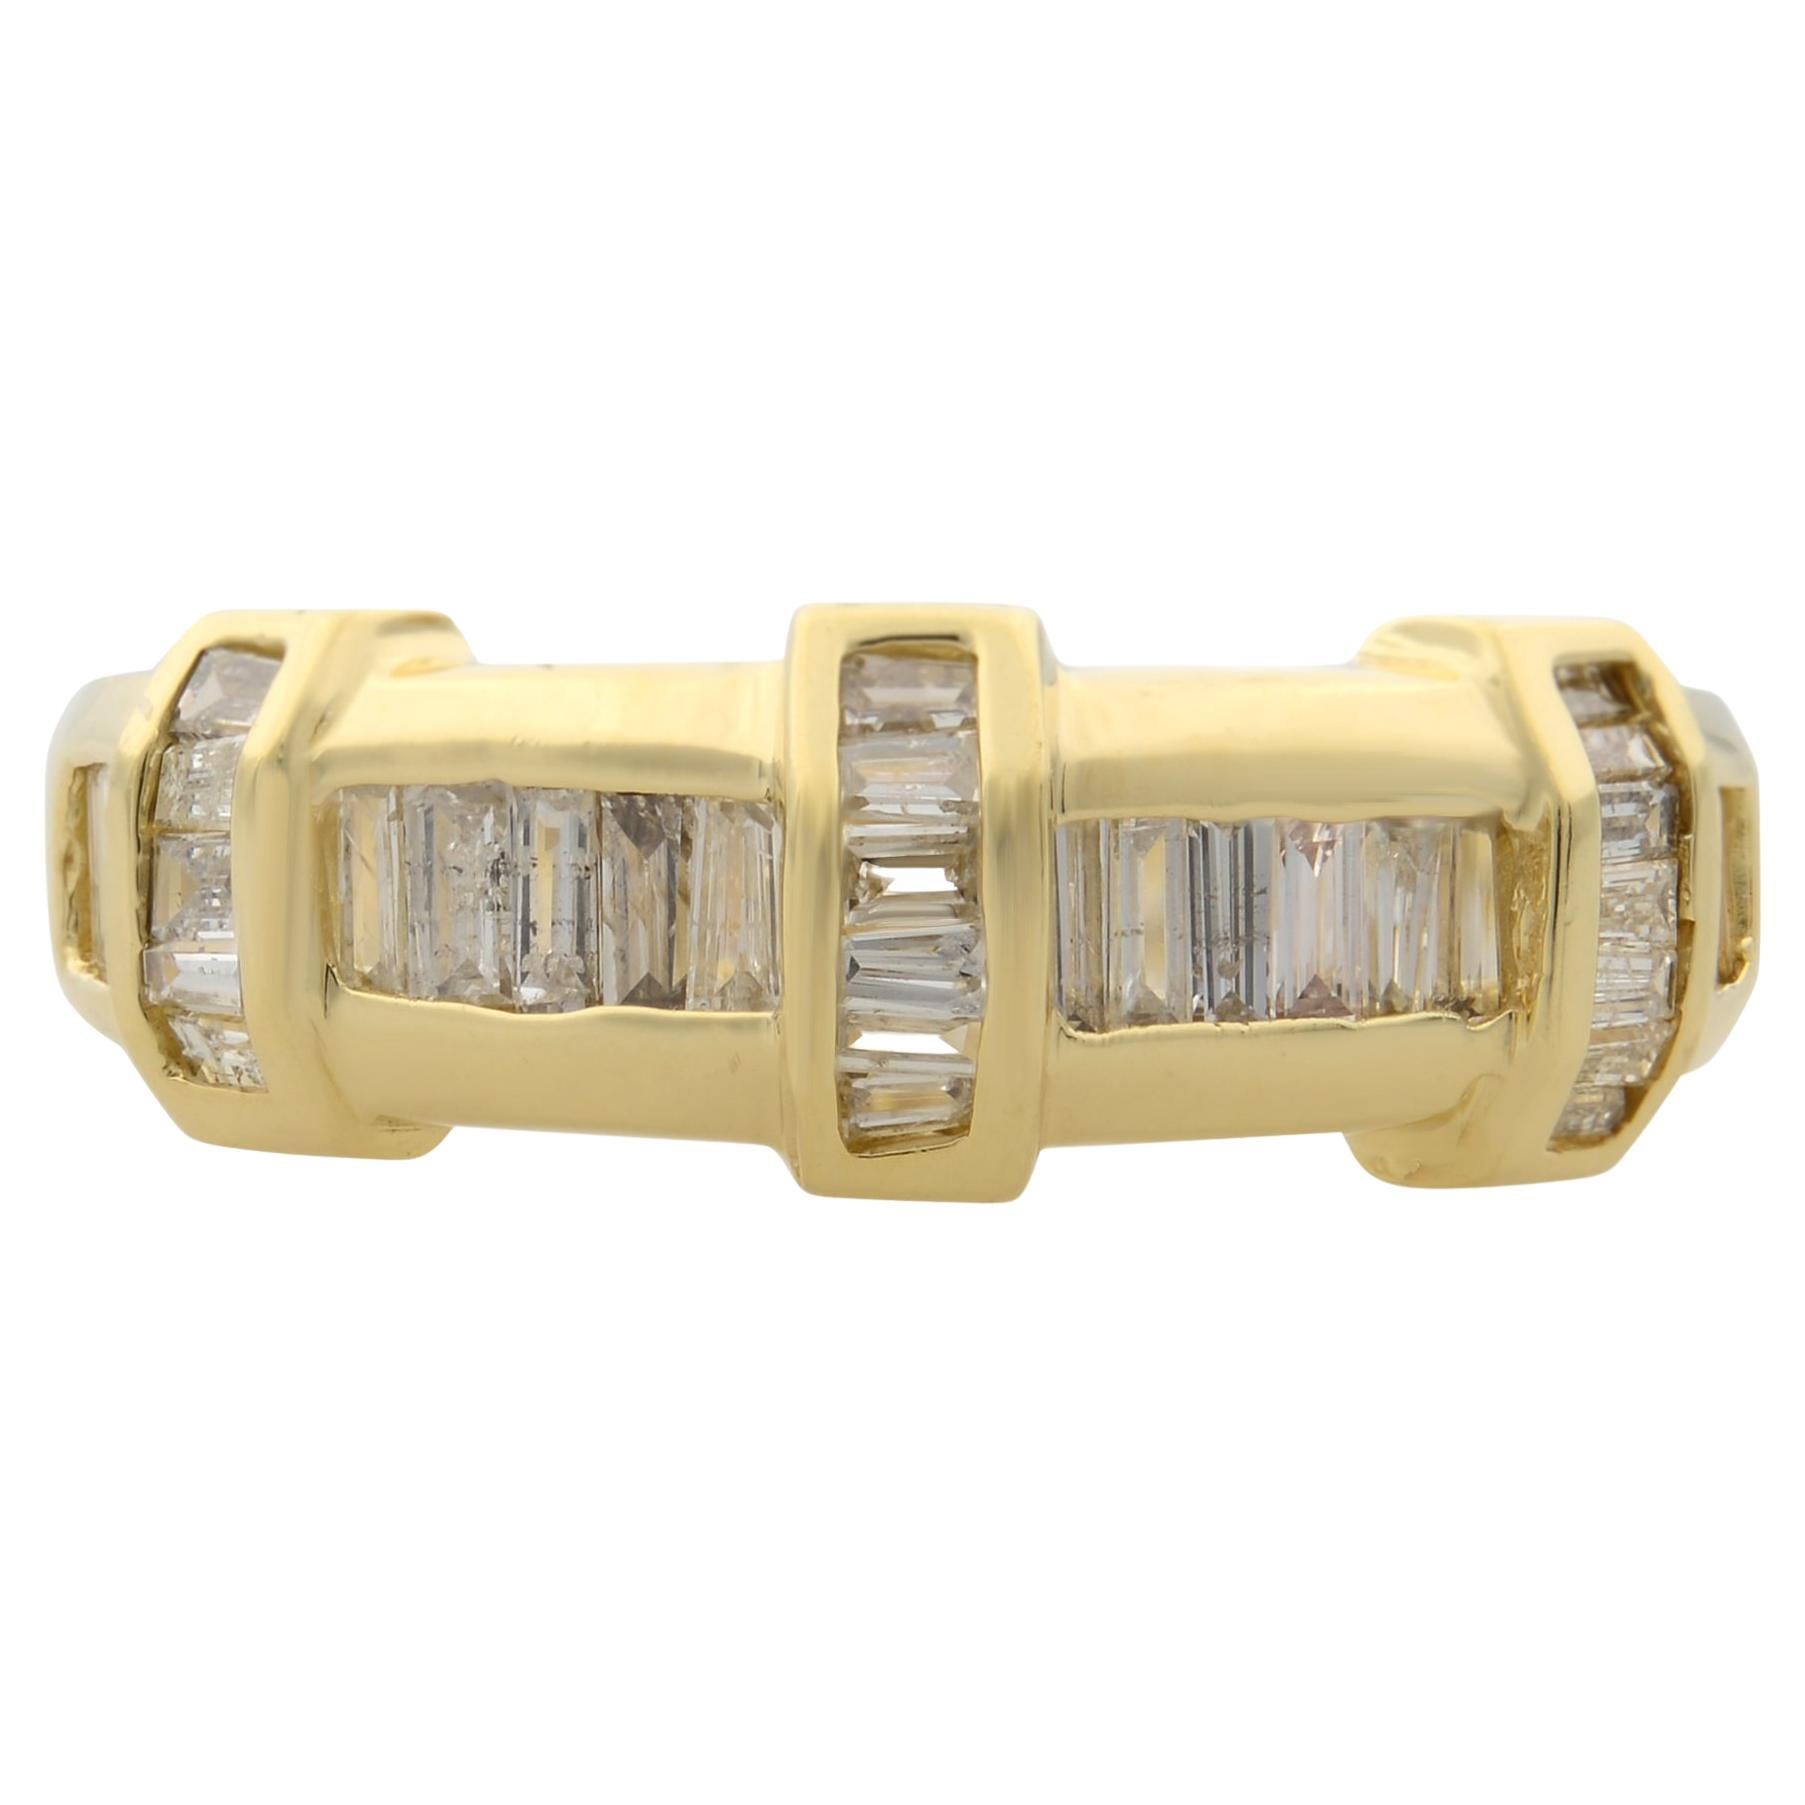 0.50Cttw Baguette Cut Diamond Ladies Band Ring 14K Yellow Gold For Sale